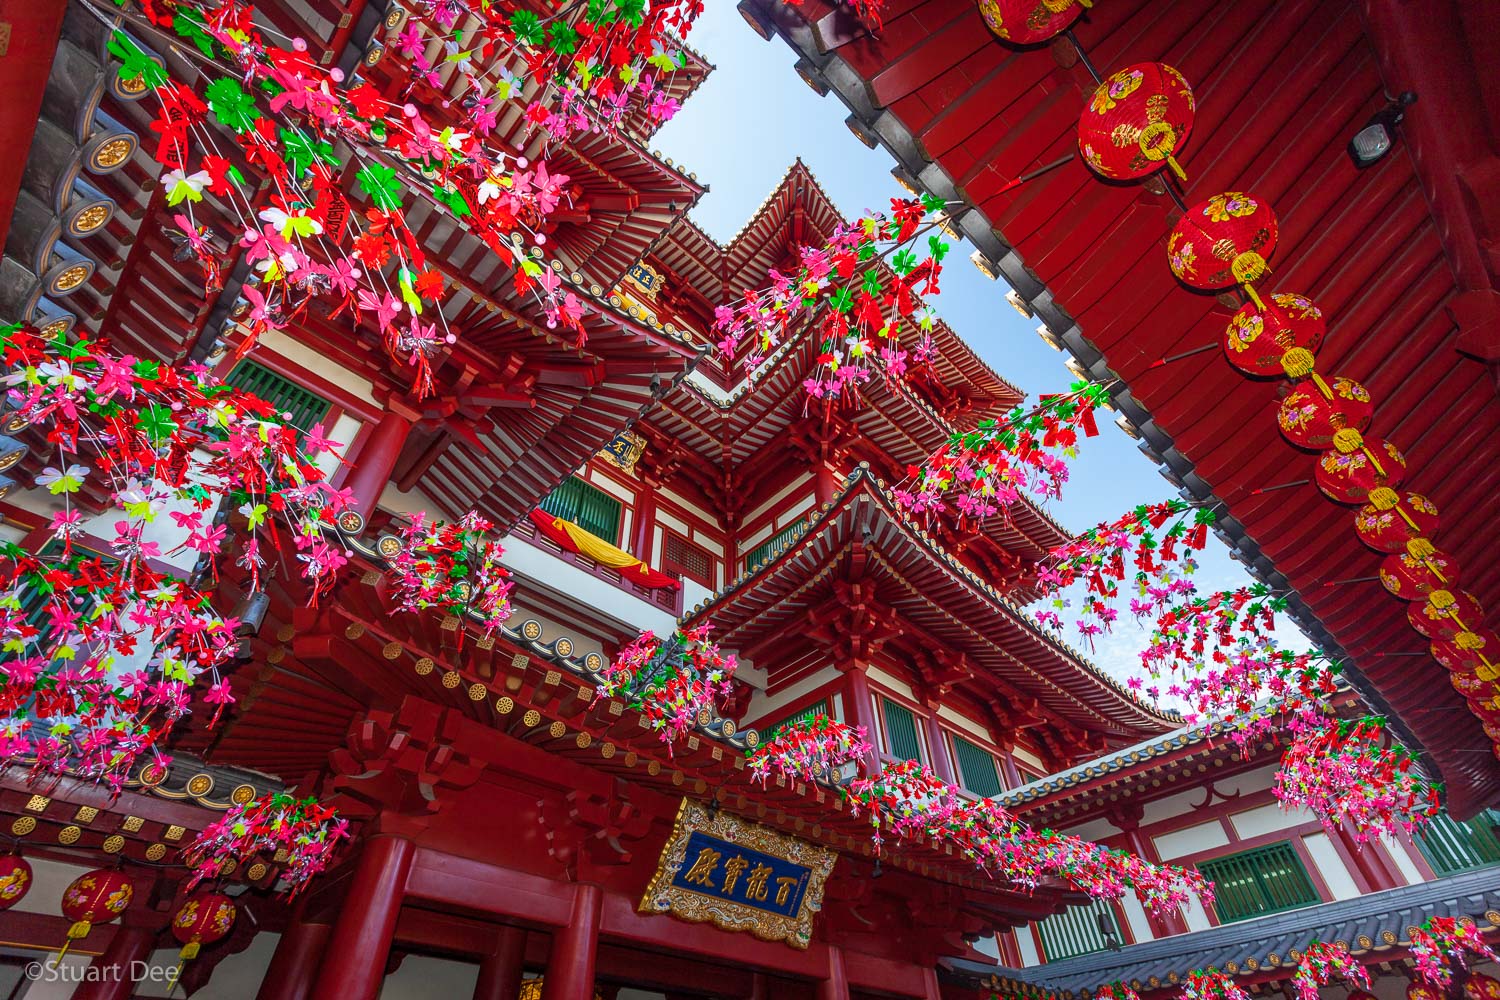  Buddha Tooth Relic Temple, Chinatown, Singapore 